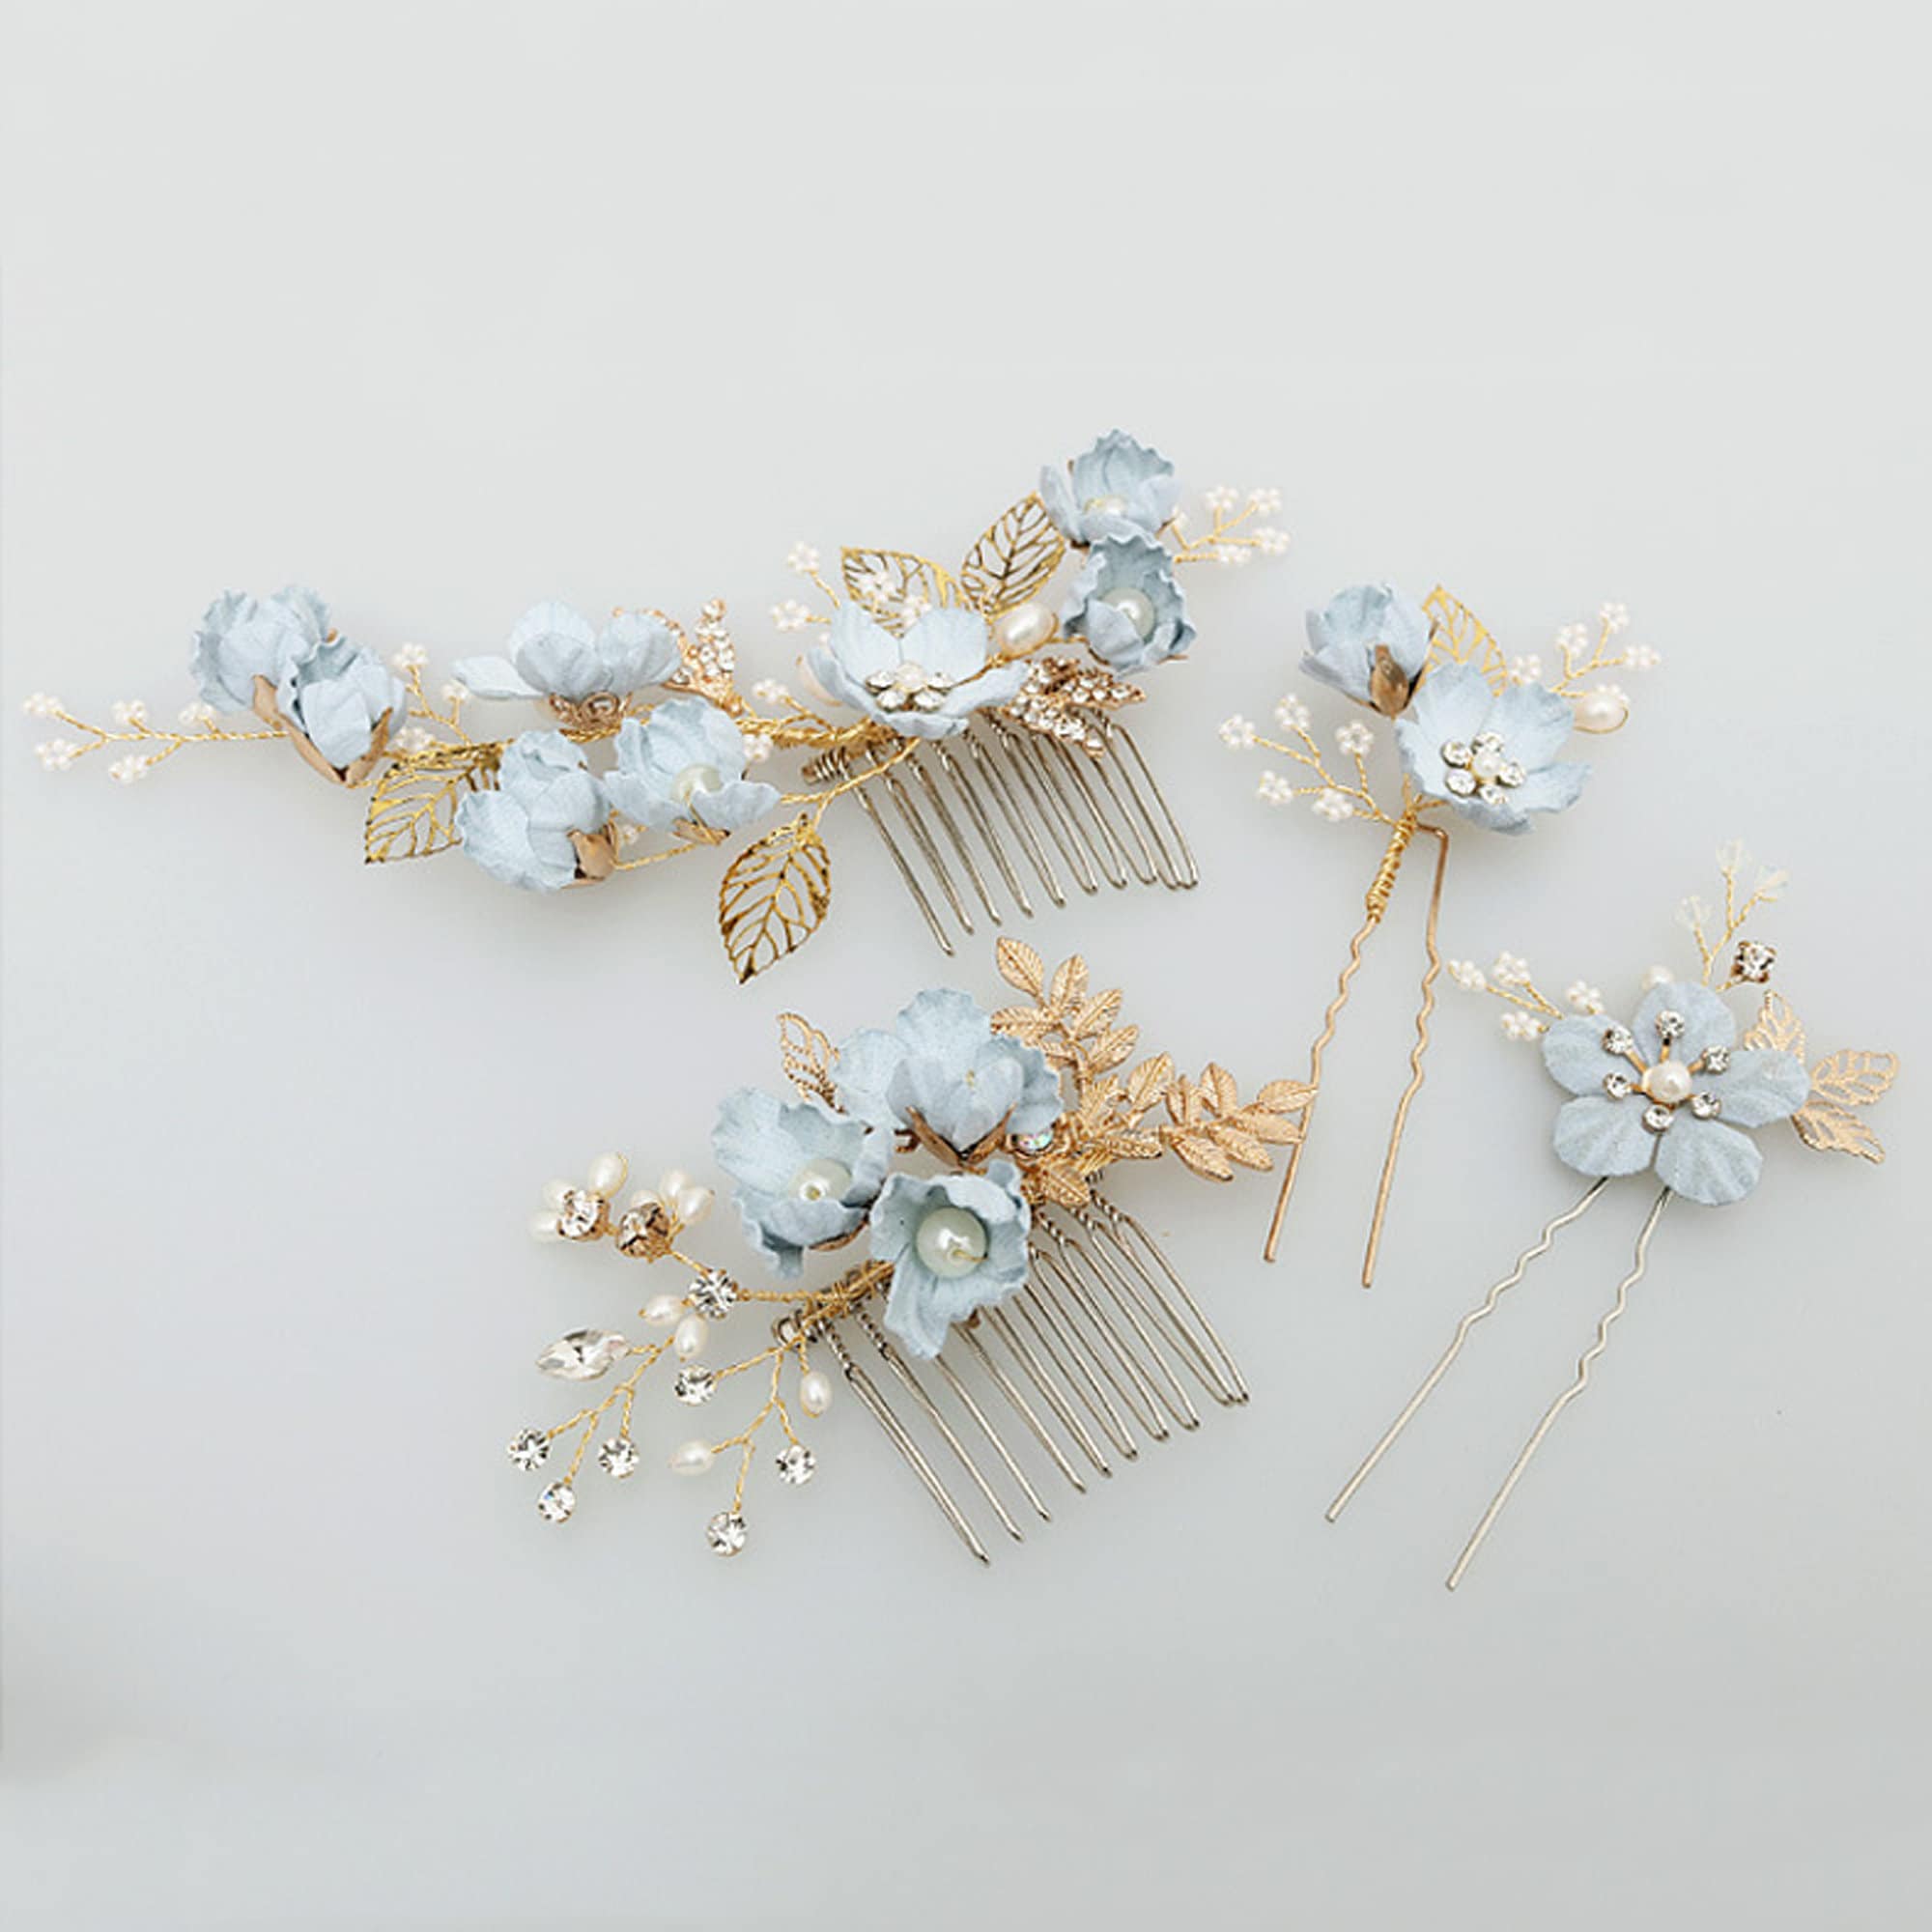 Light Blue Hair Accessories, Flower Hair Clips, Bridal Hair Accessory, Blue  Wedding Hair Comb, Periwinkle Bridal Hairpiece, With Crystals New #2226876  Weddbook | Flower Rhinestones Hair Combs Accessories (blue) 